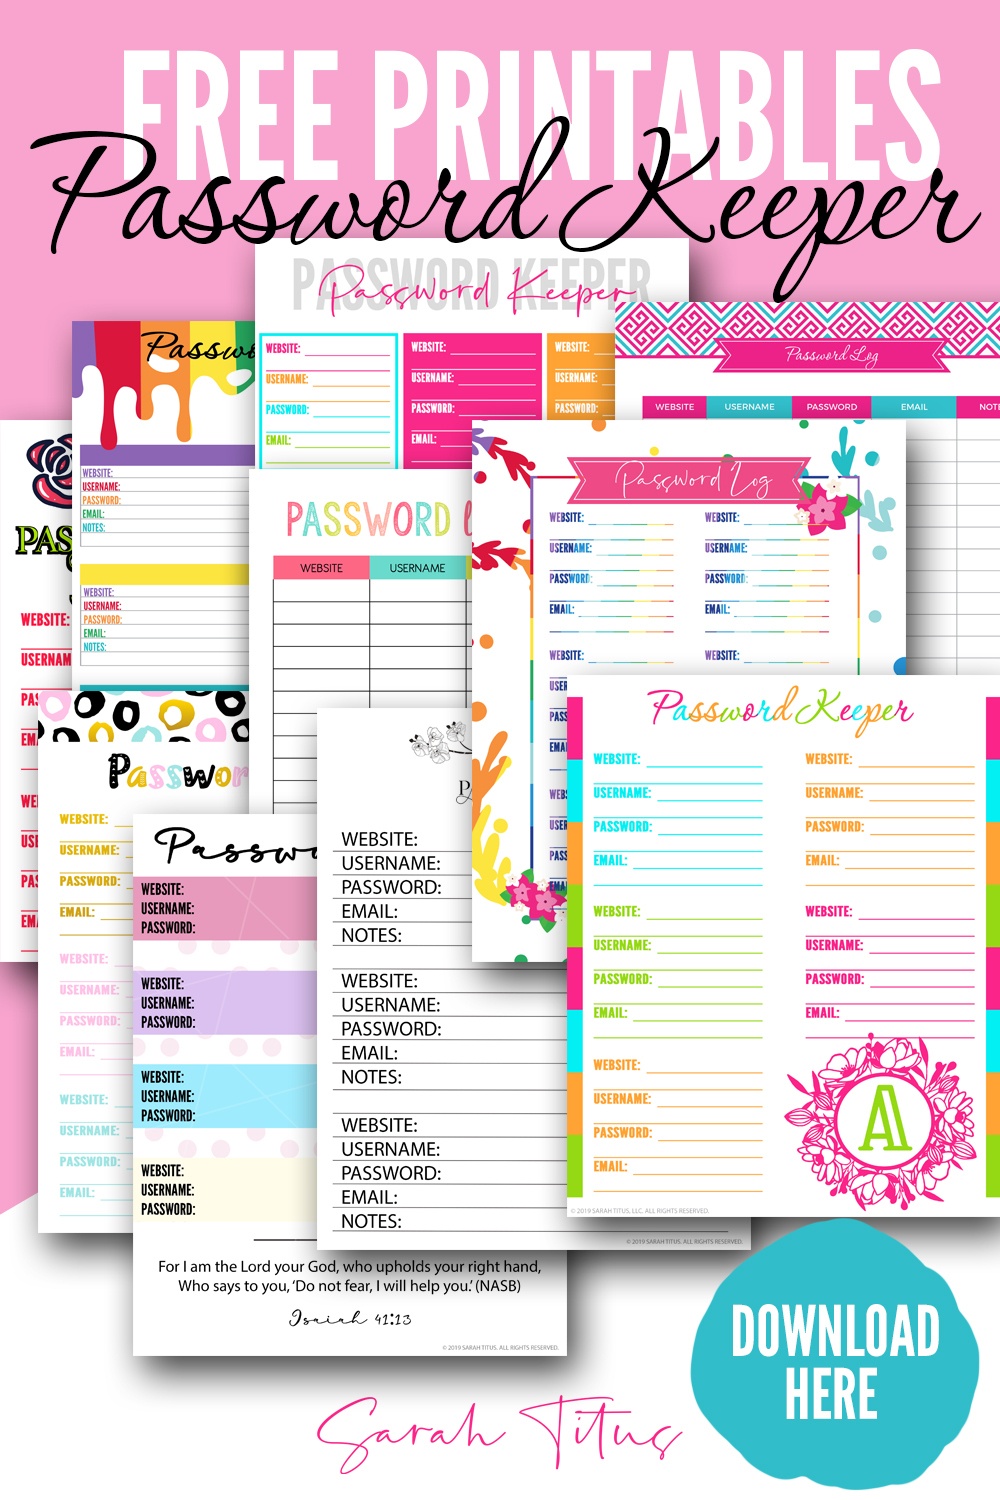 Top Password Keeper Free Printables To Download Instantly - Sarah Titus - Free Printable Password Keeper